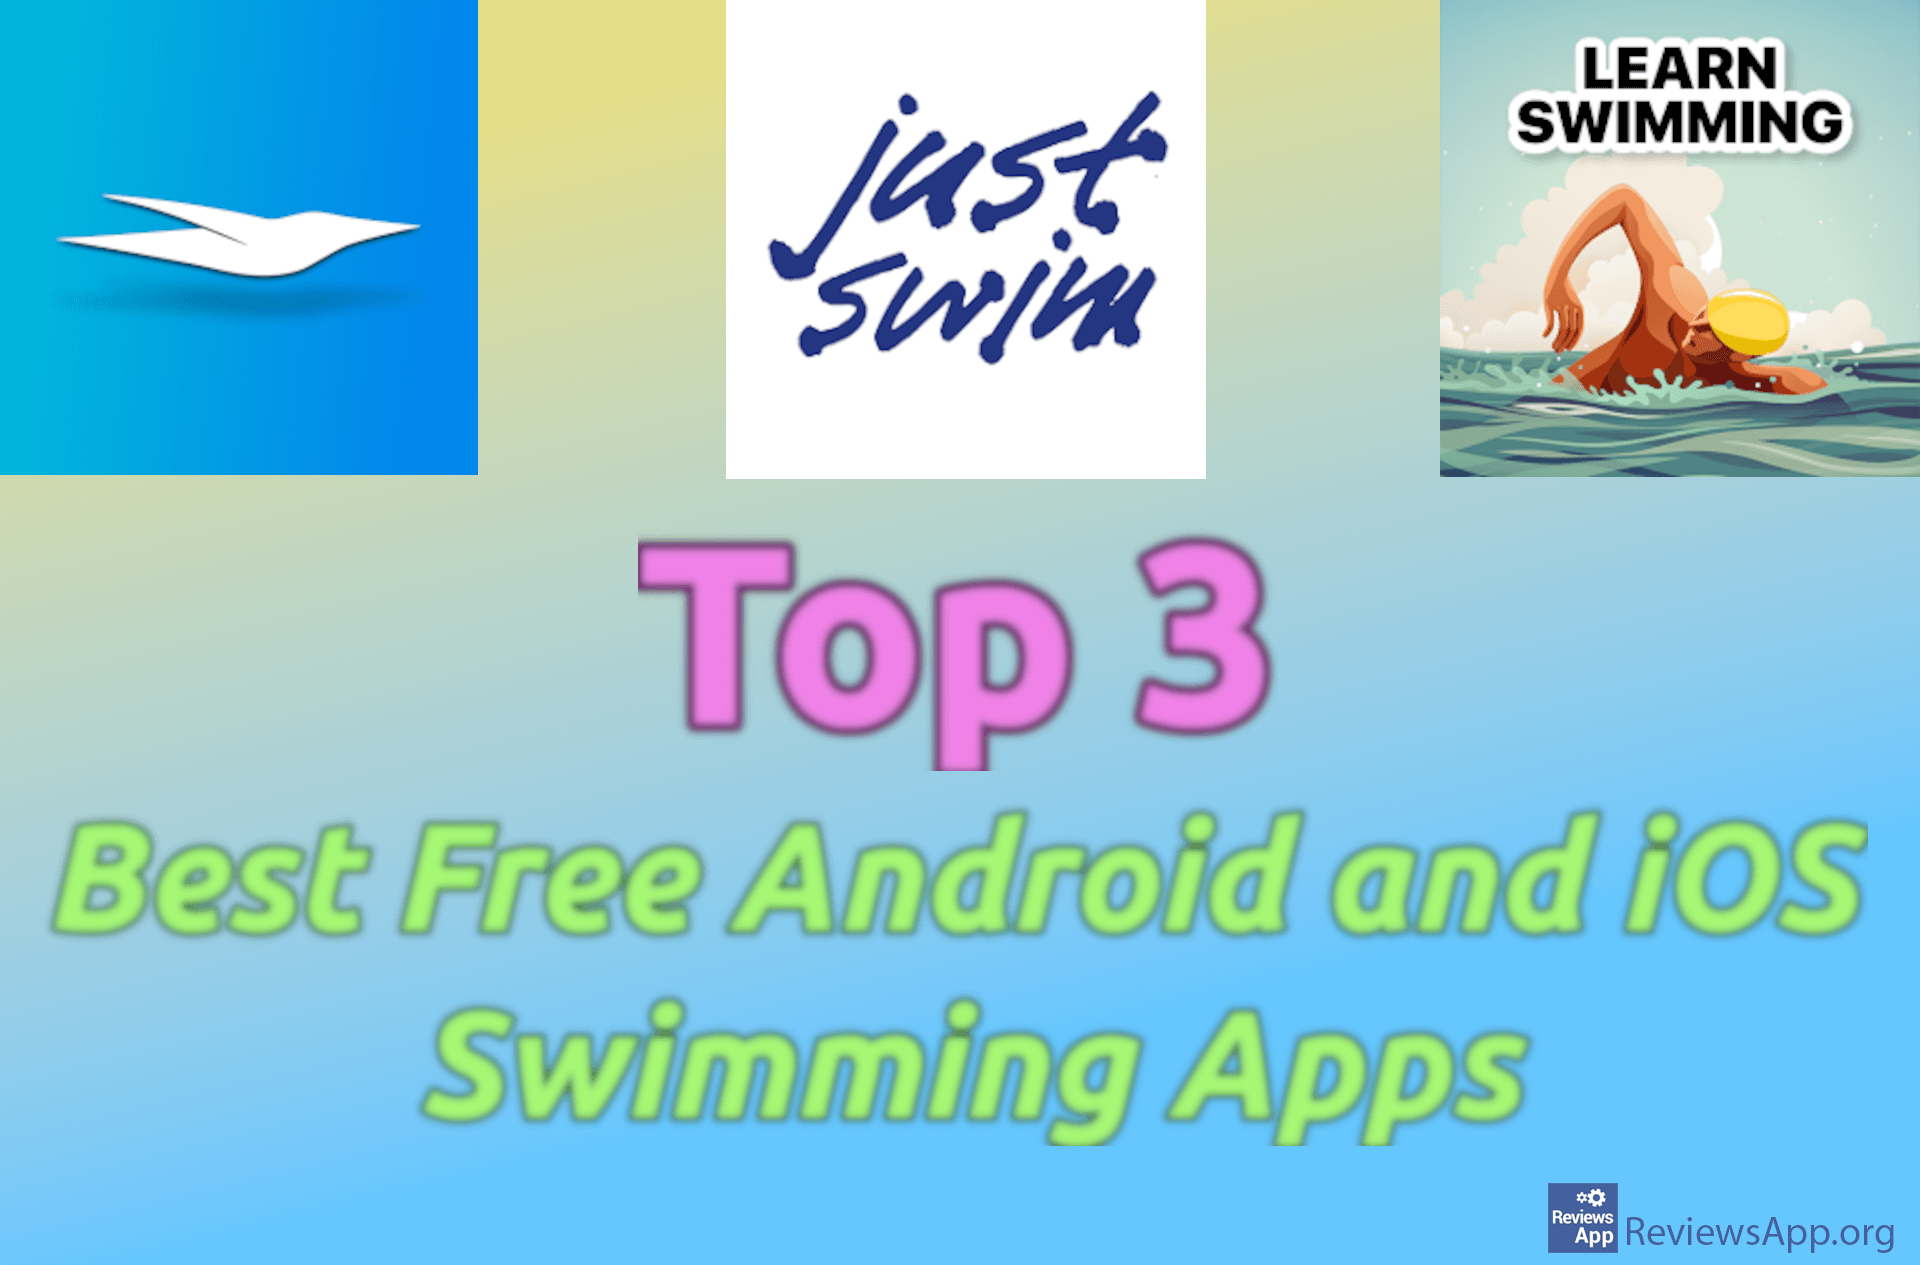 Top 3 Best Free Android and iOS Swimming Apps